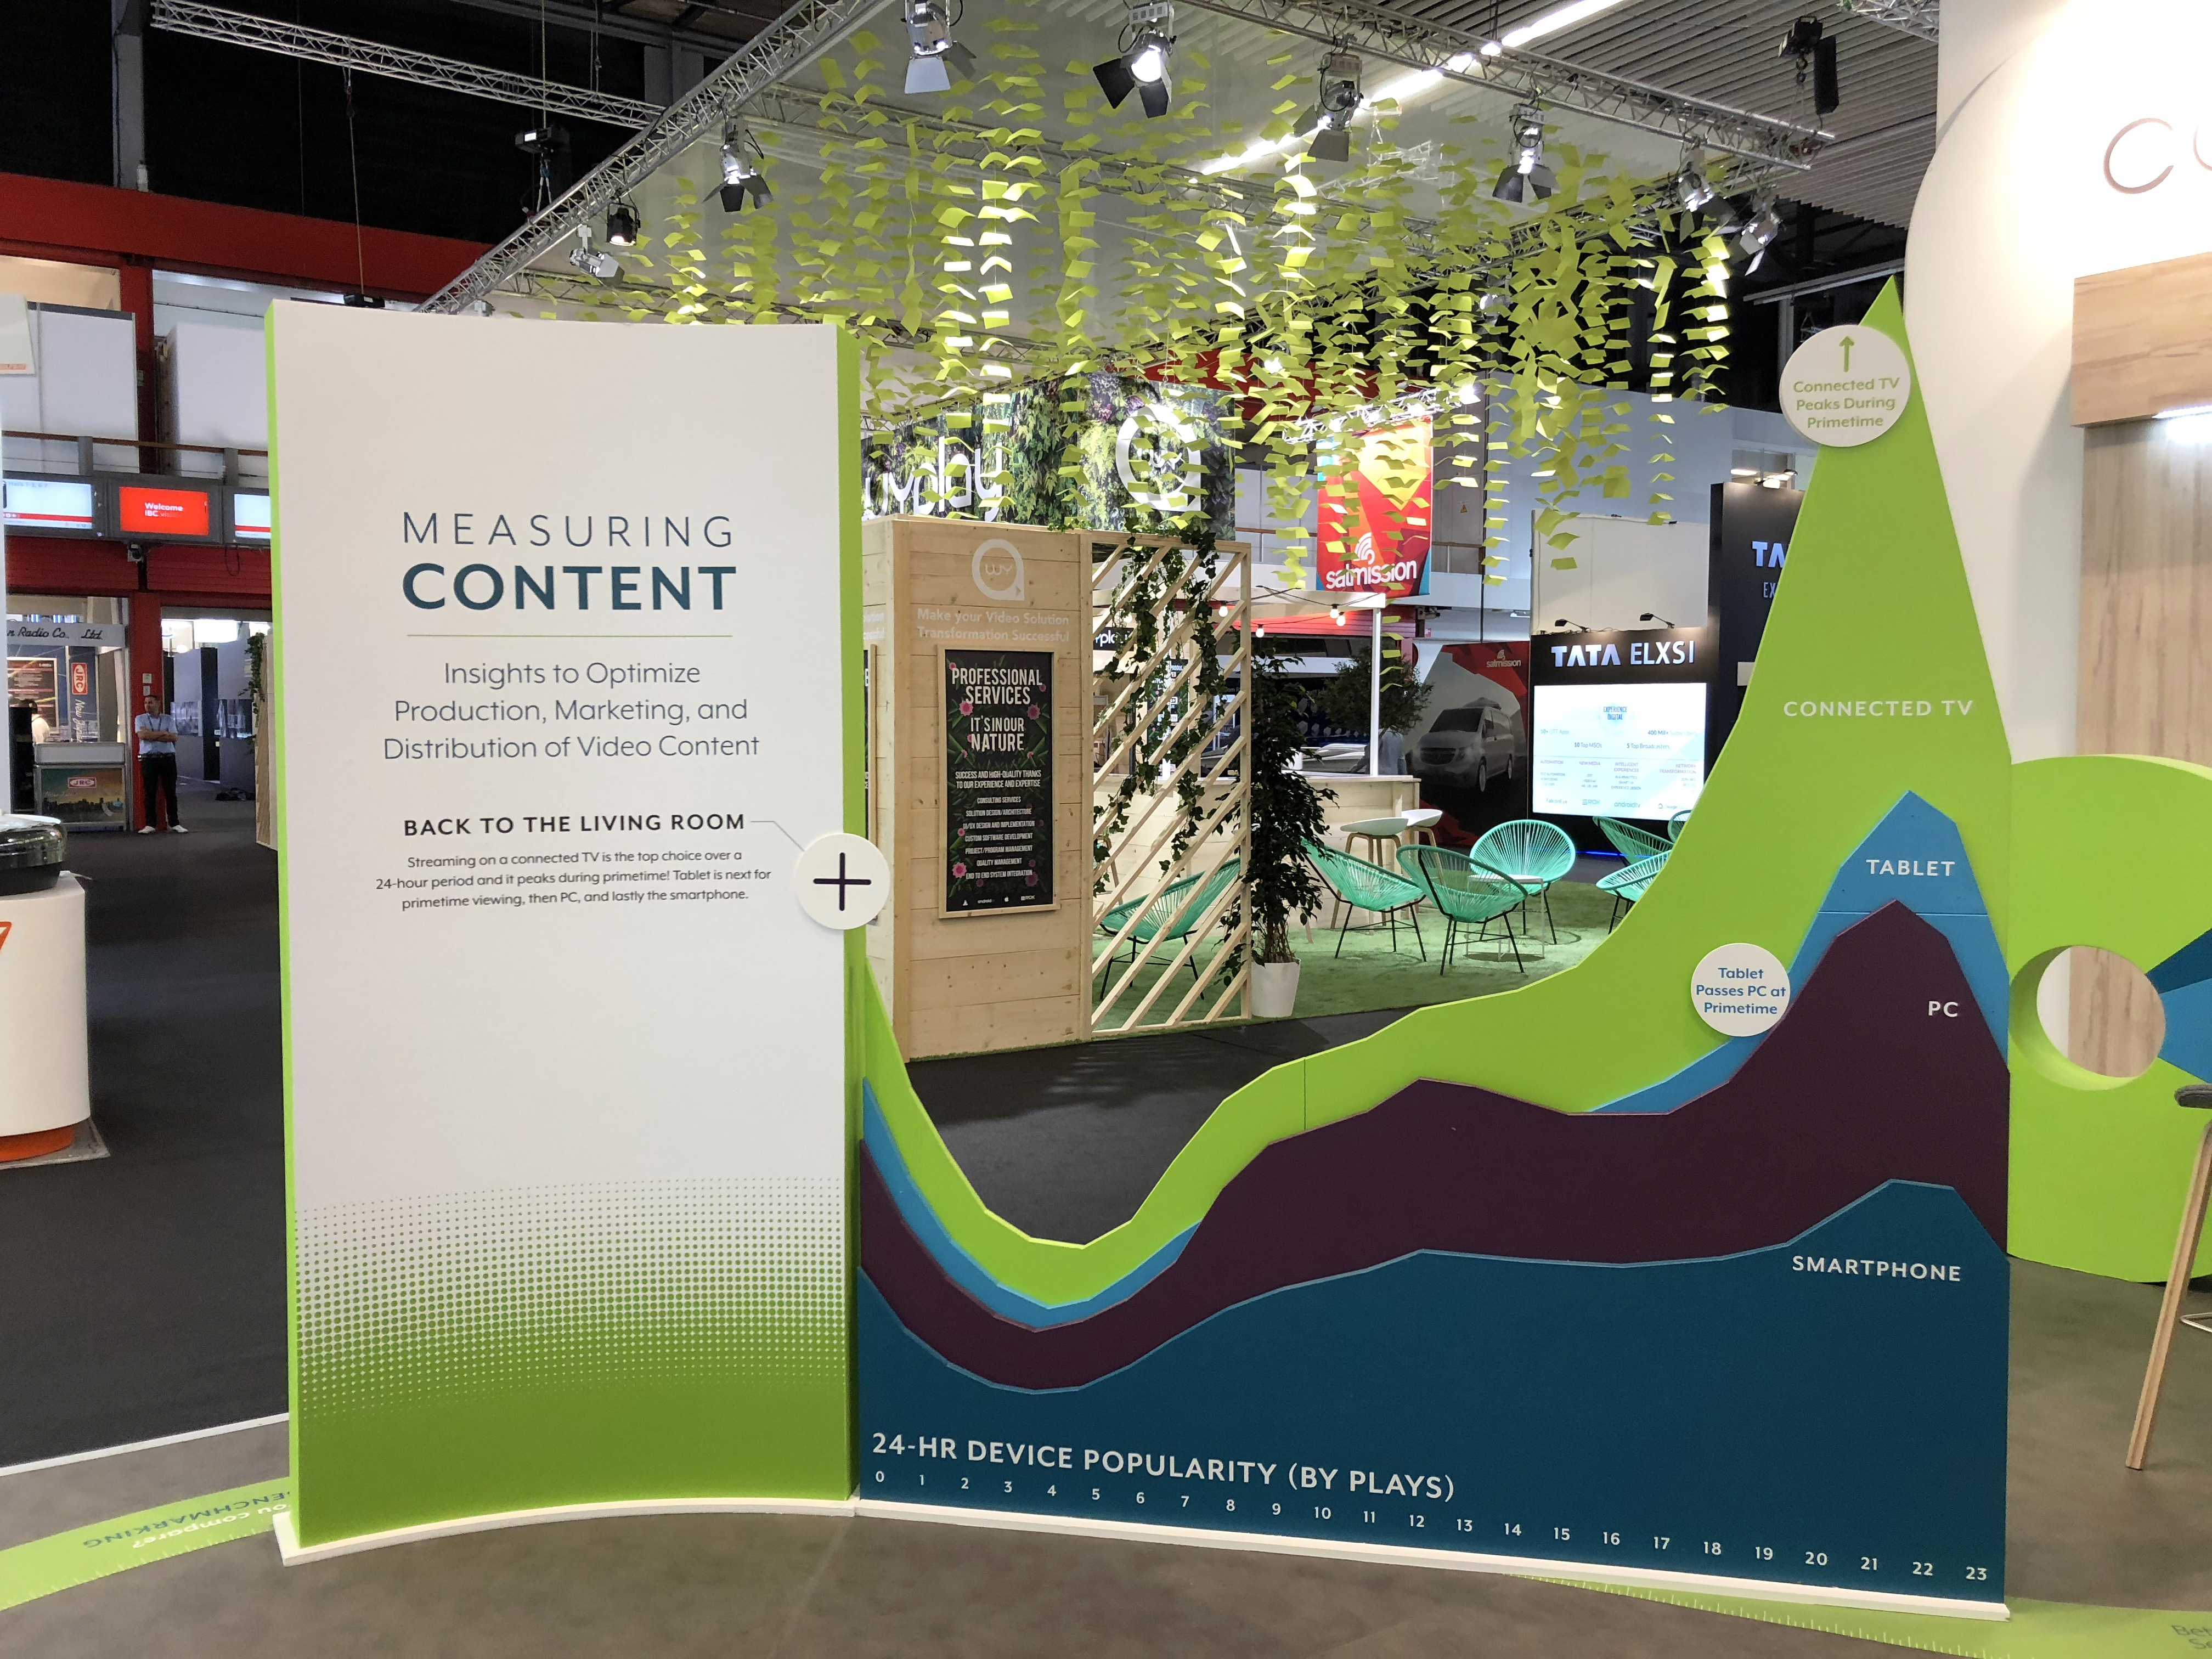 Conviva's Booth Highlighting Measuring Content With Graph